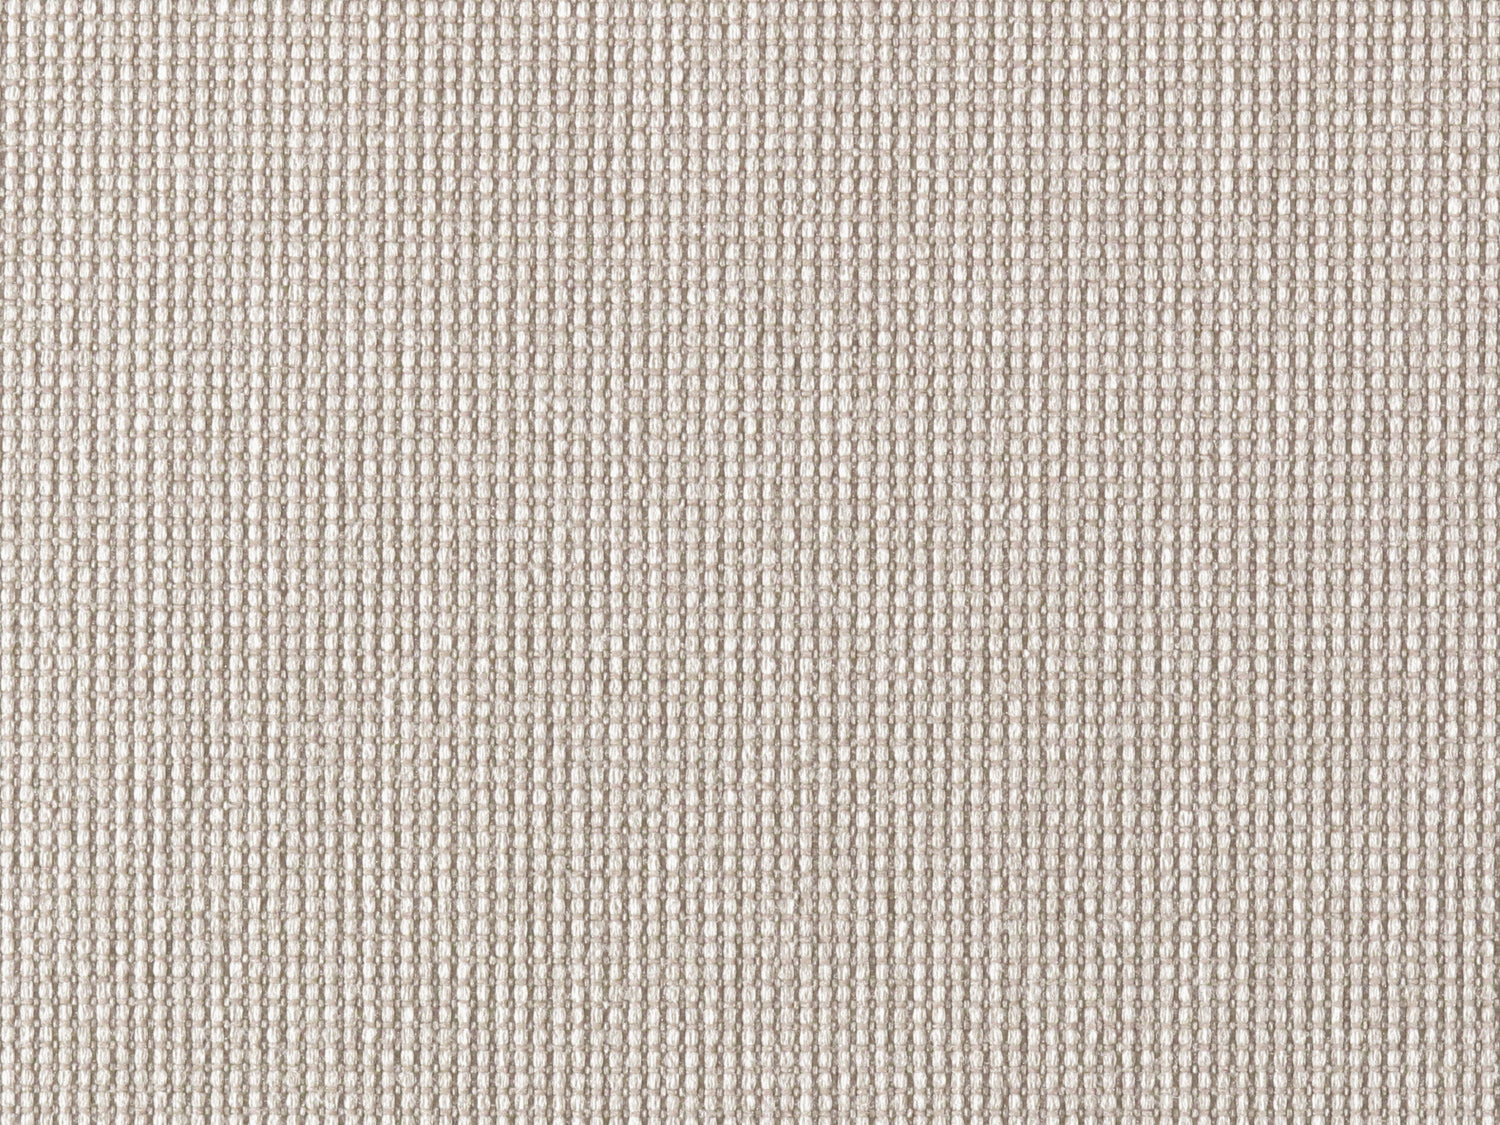 Overland fabric in almond color - pattern number NK 0003A006 - by Scalamandre in the Old World Weavers collection